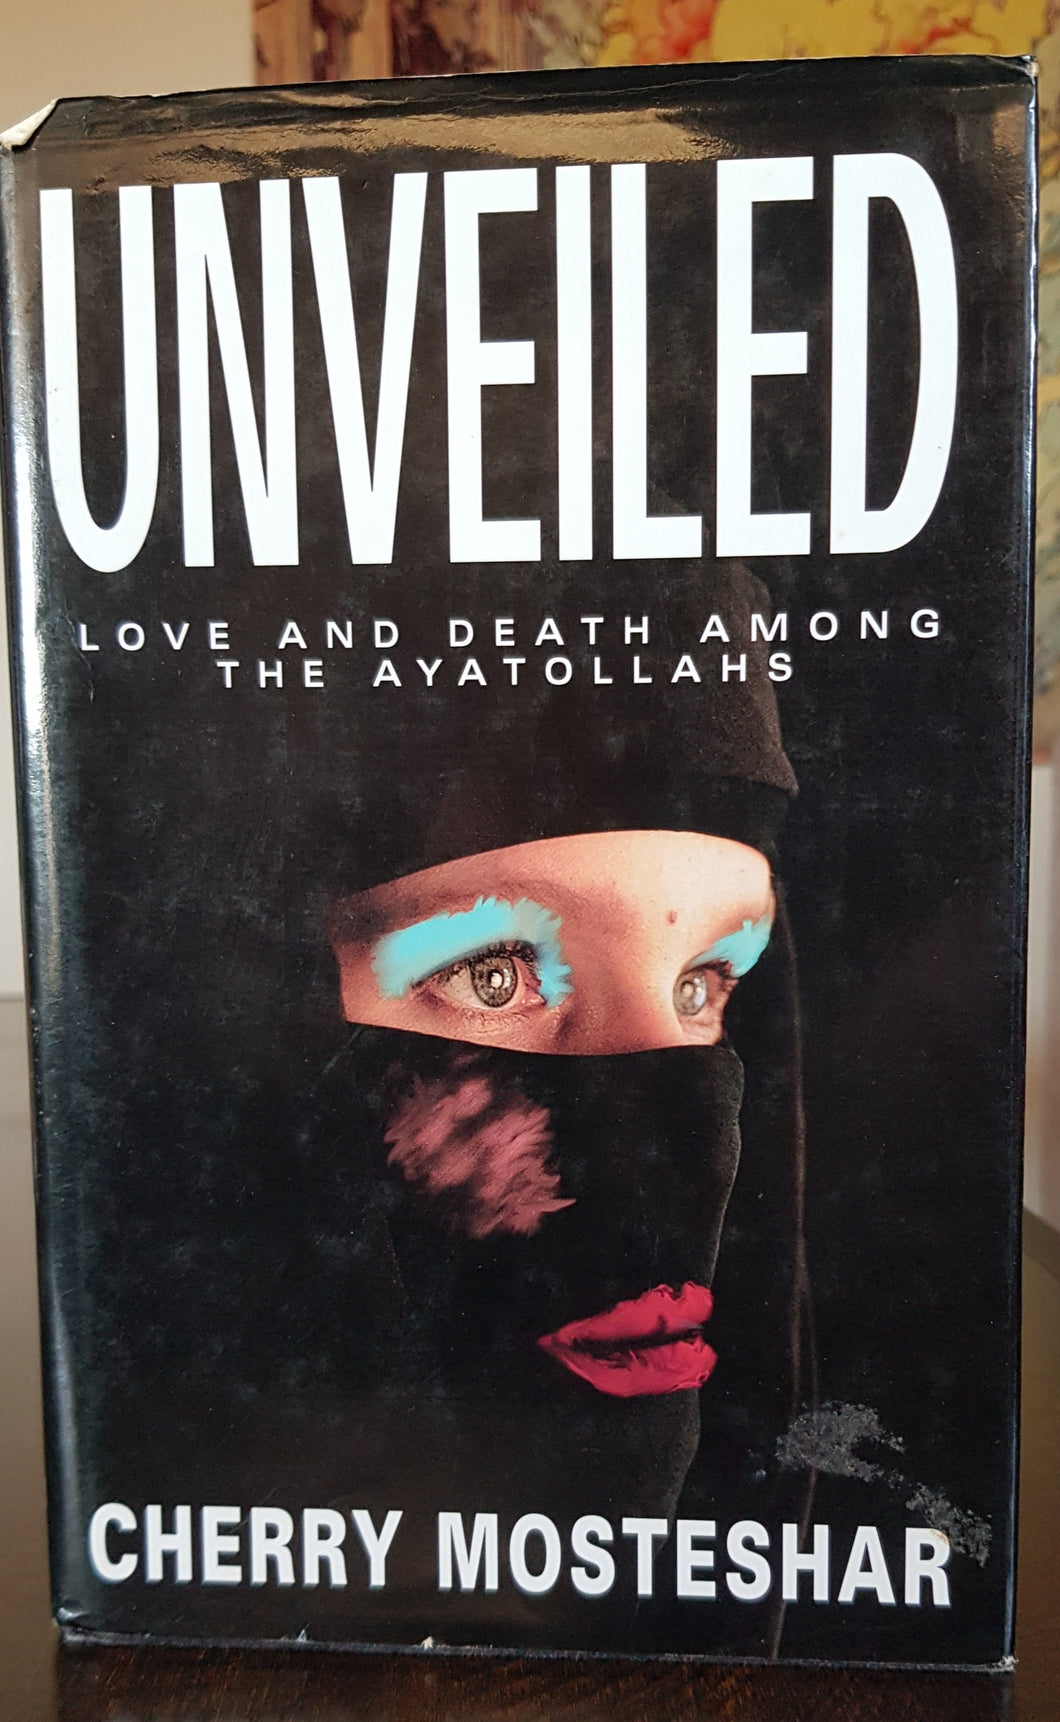 Unveiled: Love and Death Among the Ayatollahs by Cherry Mosteshar